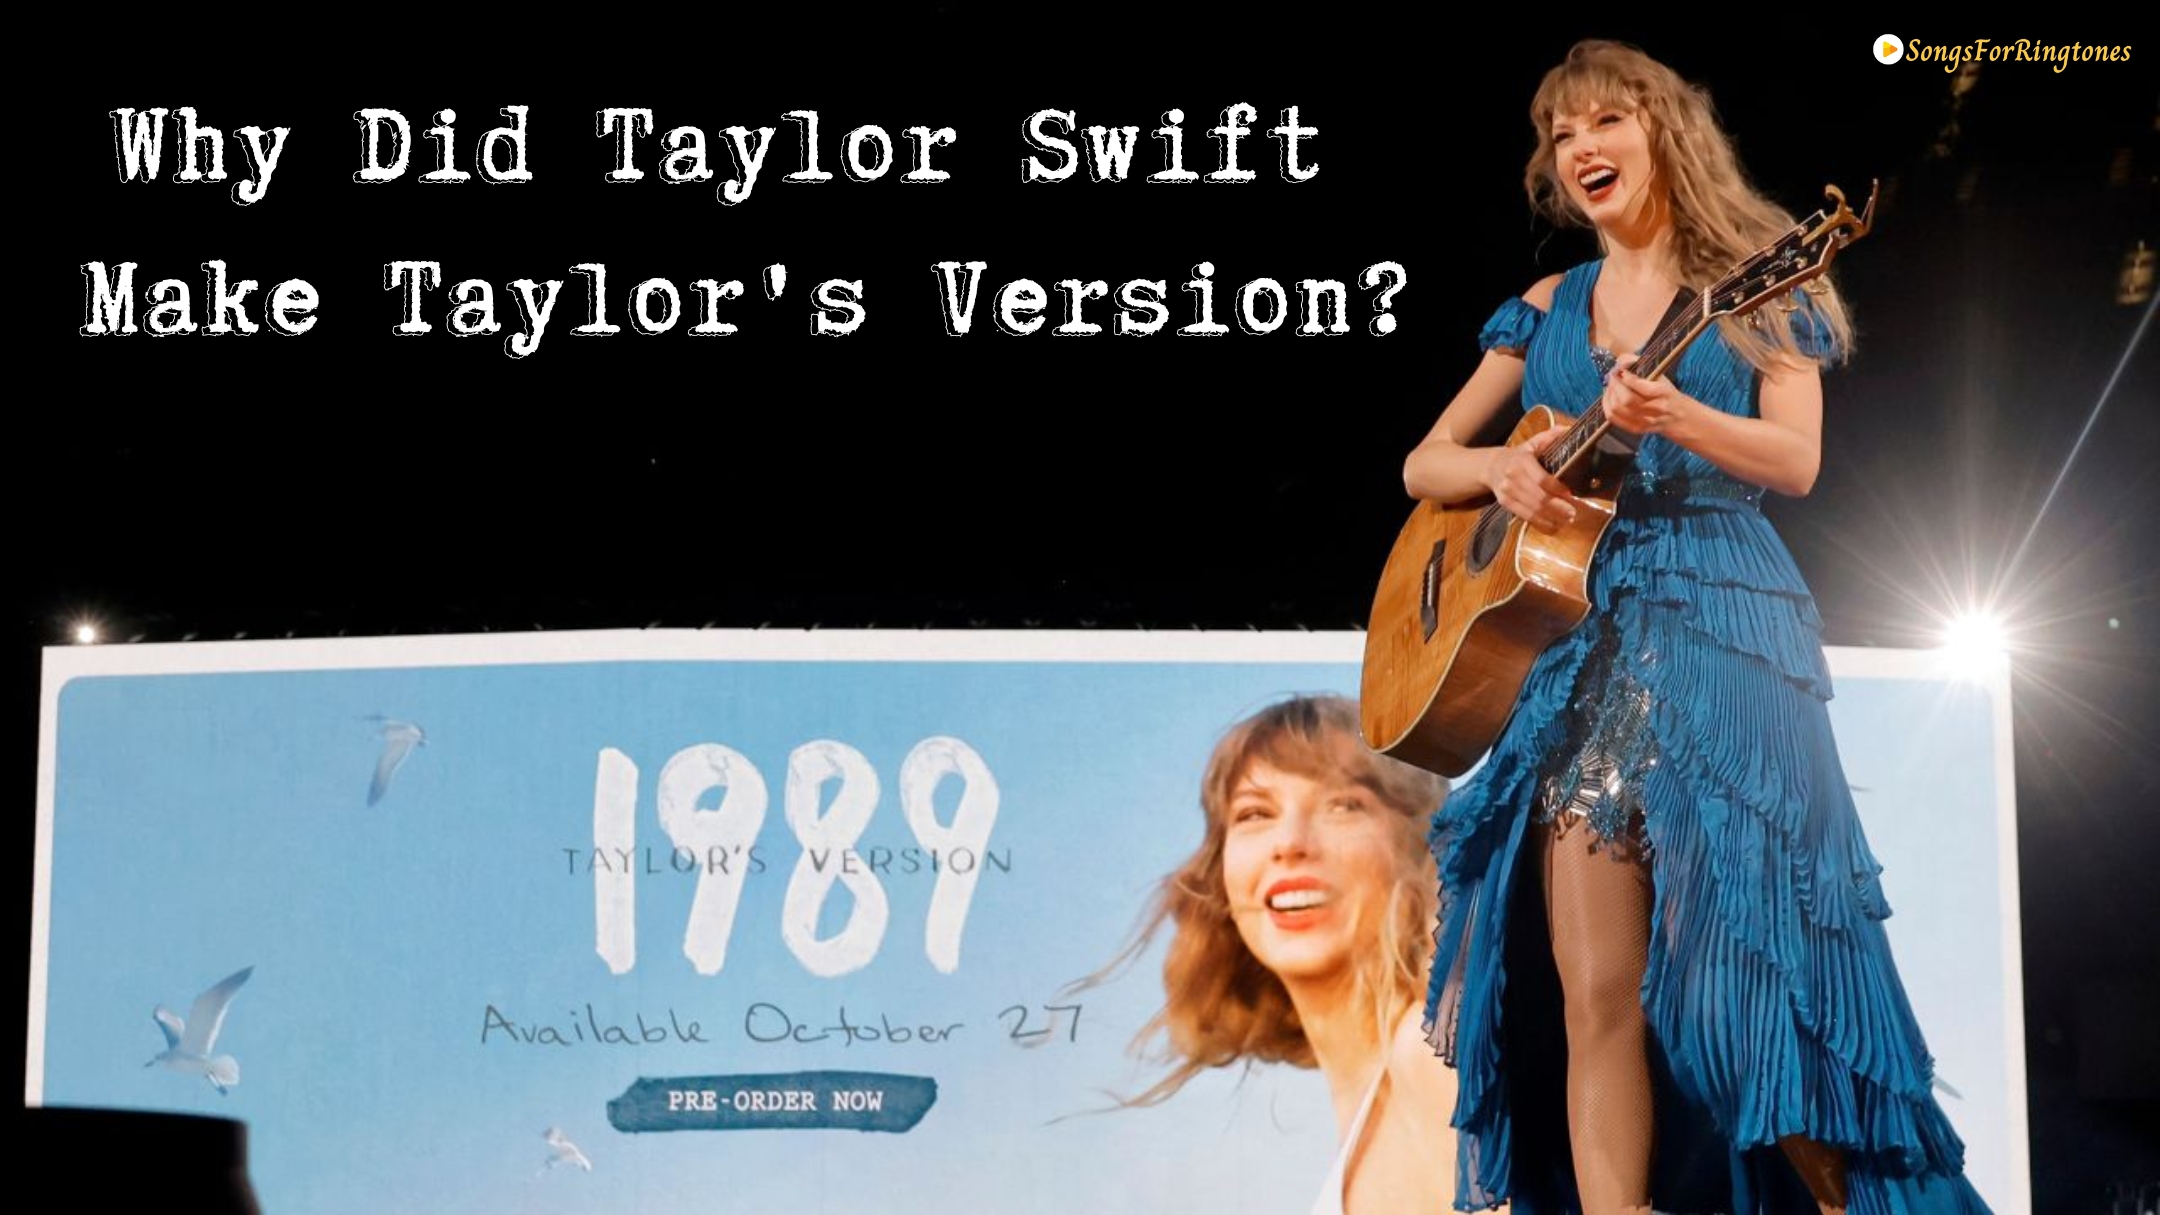 The Resounding Echo: Why Did Taylor Swift Make Taylor’s Version?